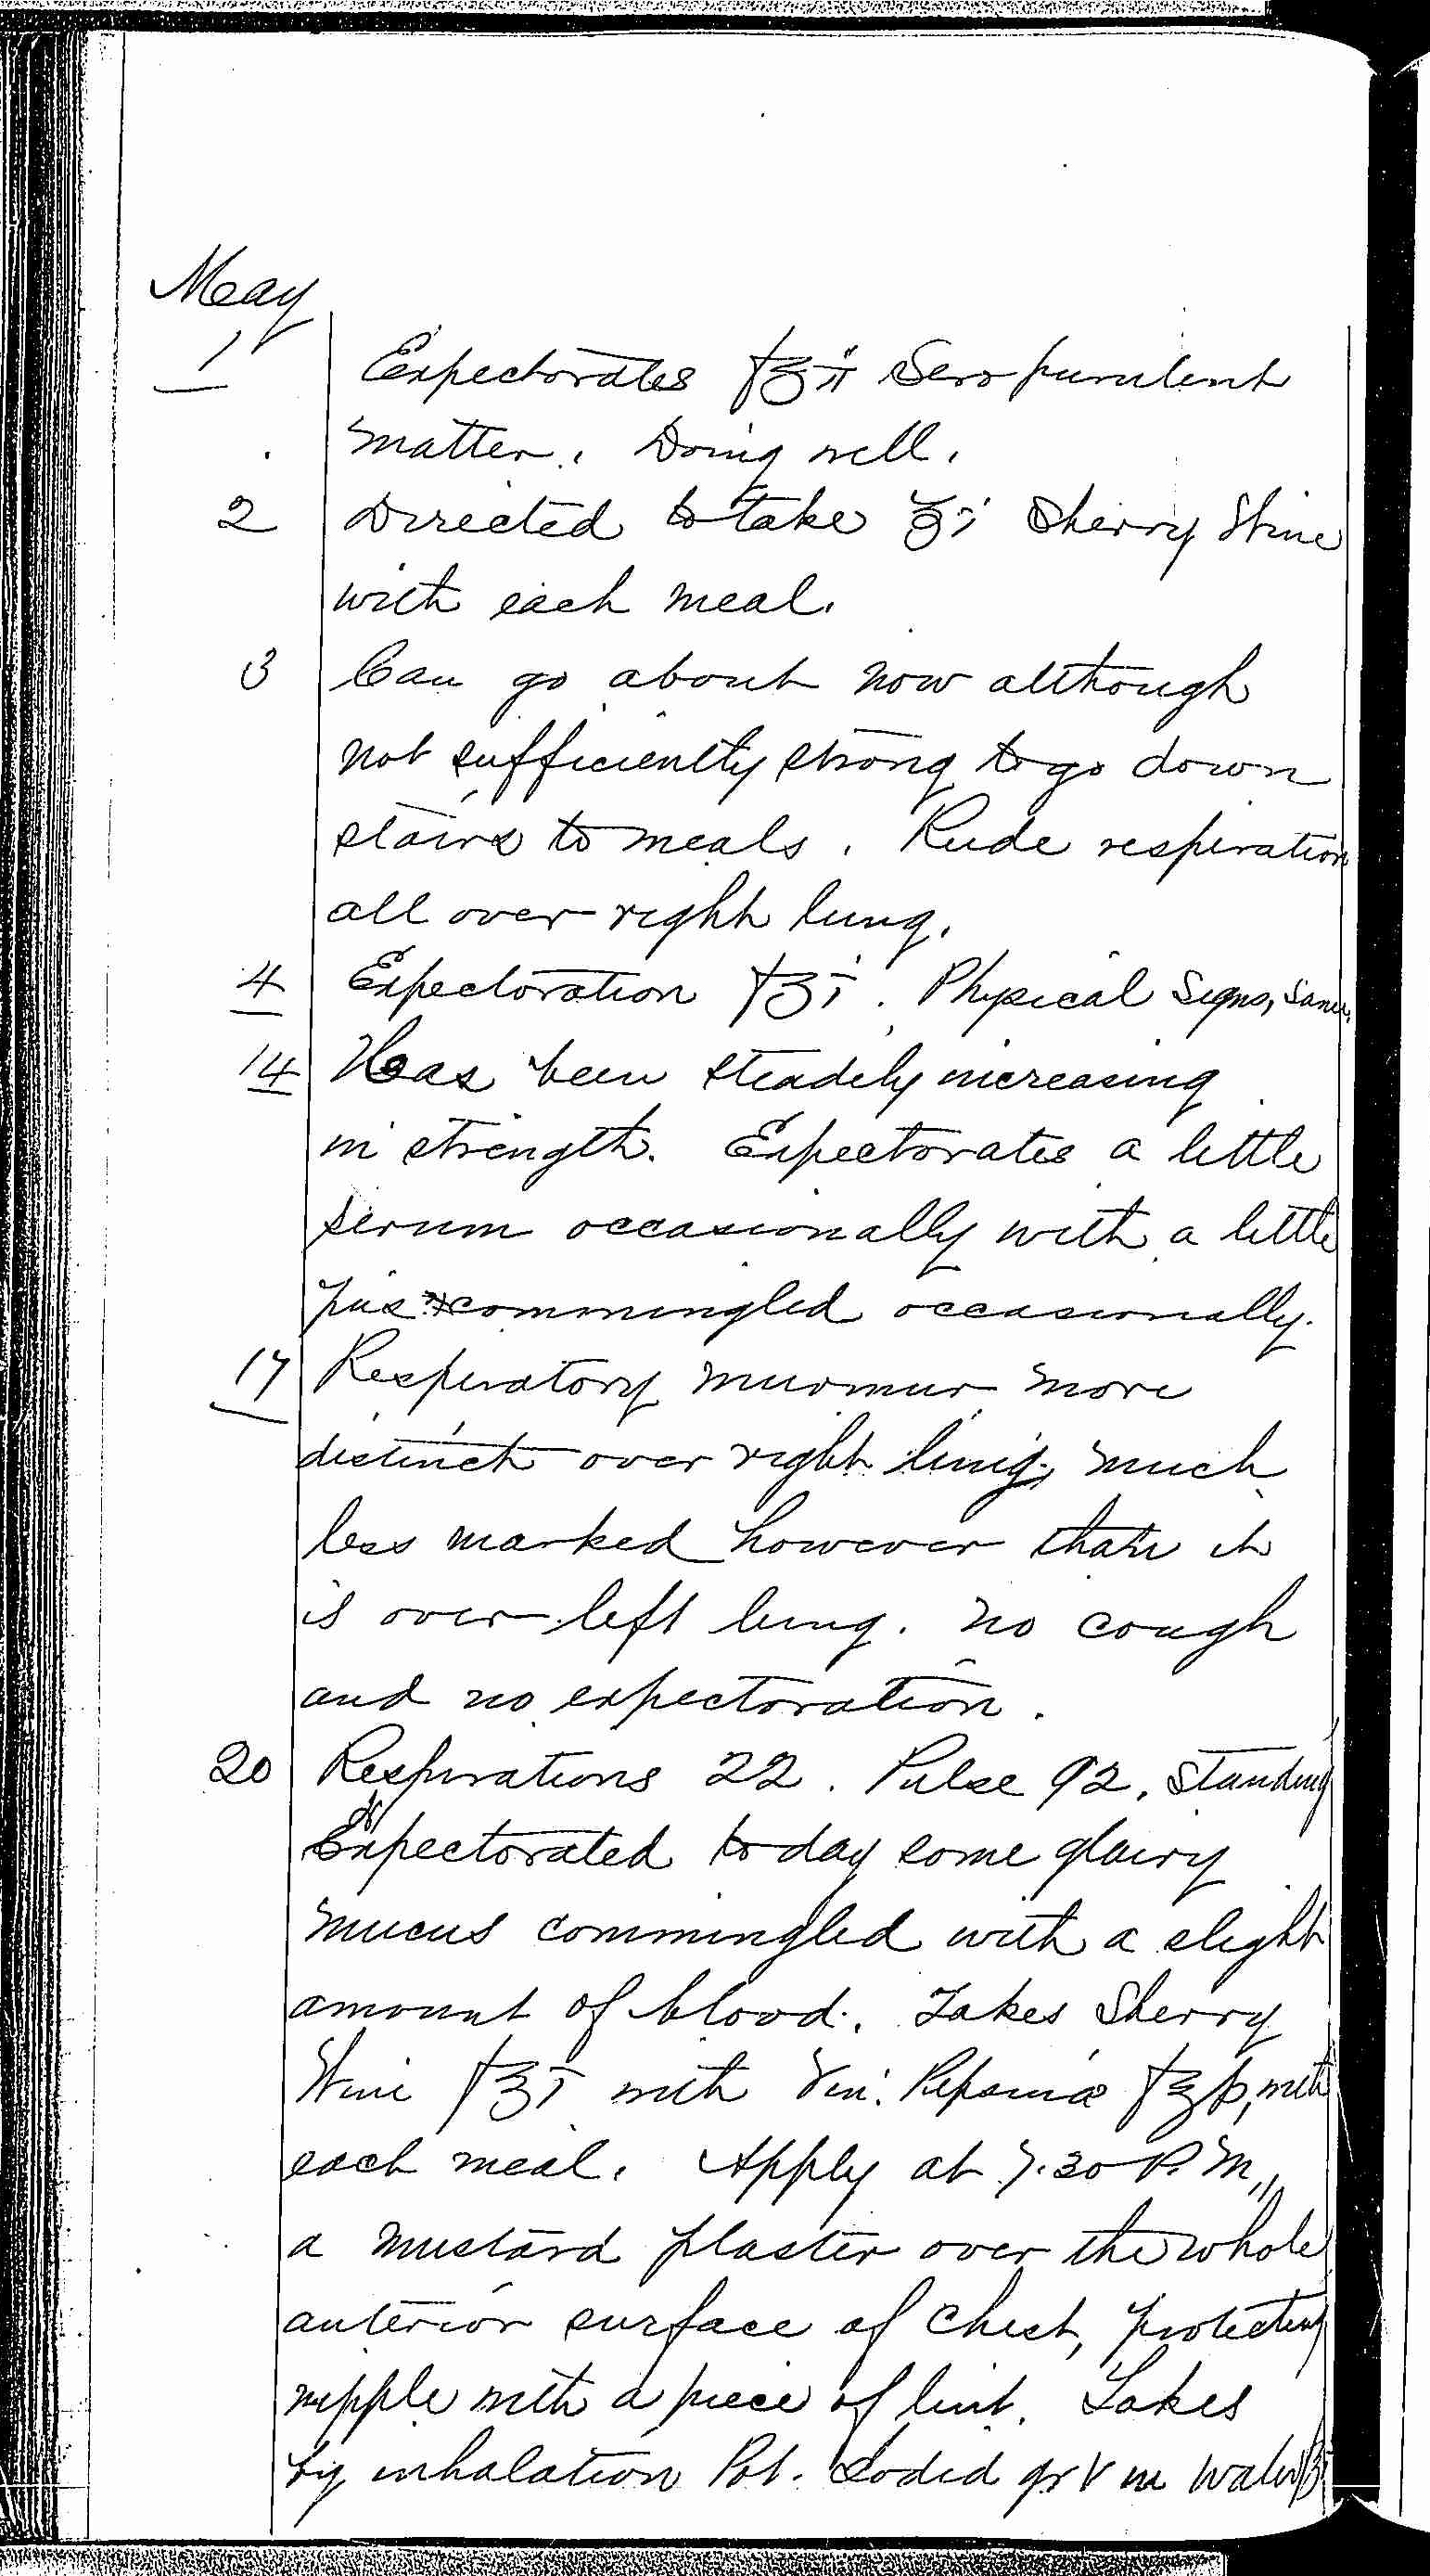 Entry for Peter C. Cheeks (page 14 of 16) in the log Hospital Tickets and Case Papers - Naval Hospital - Washington, D.C. - 1868-69